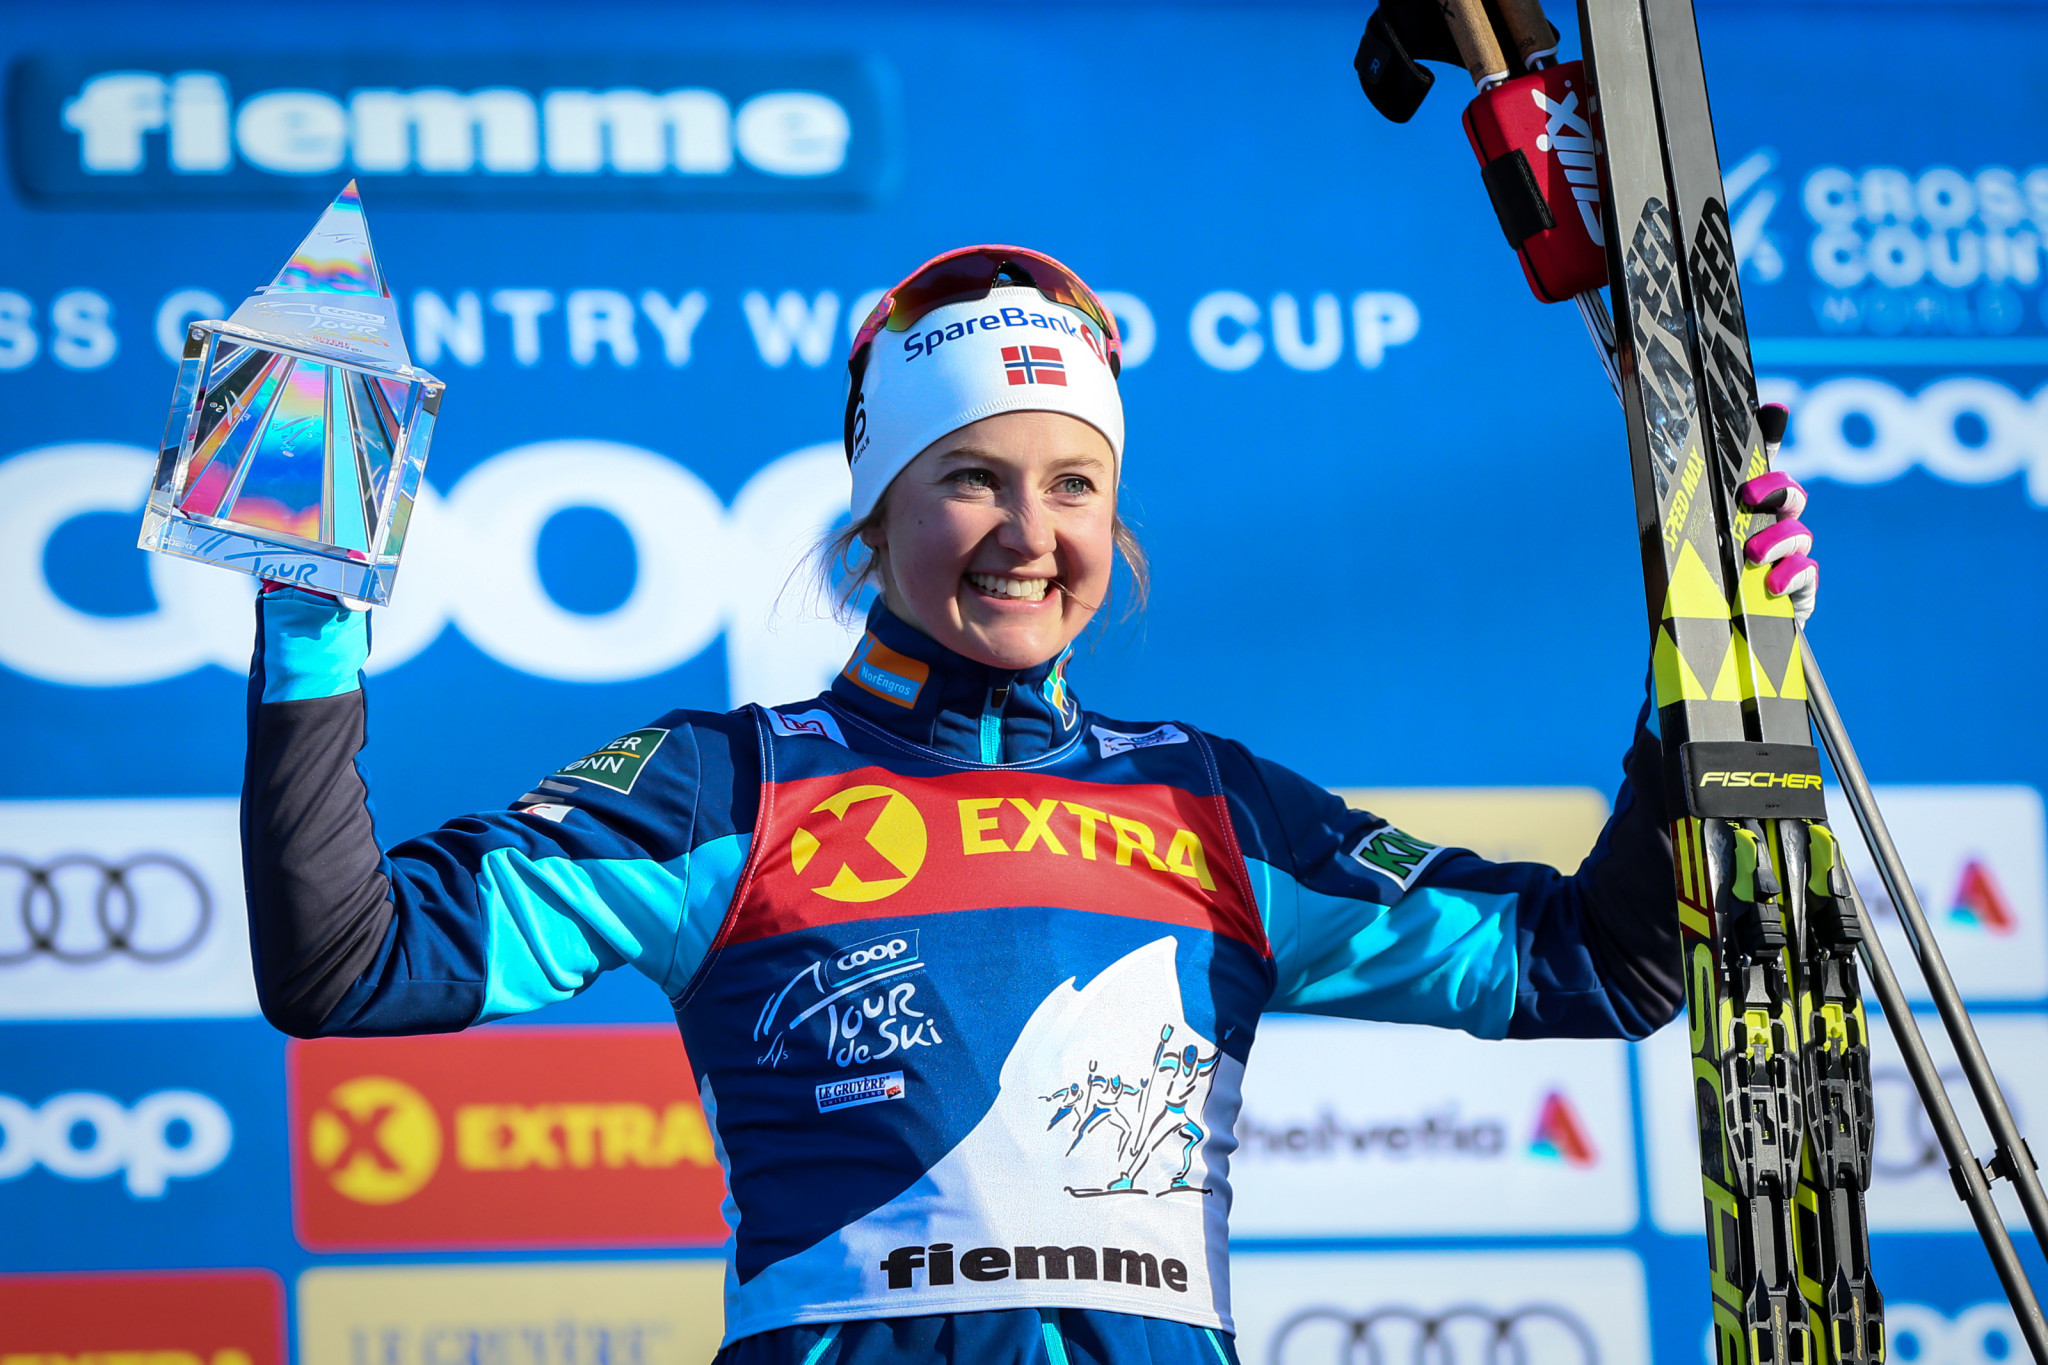 Norway complete Tour de Ski double as Østberg and Klaebo win again in Val Di Fiemme